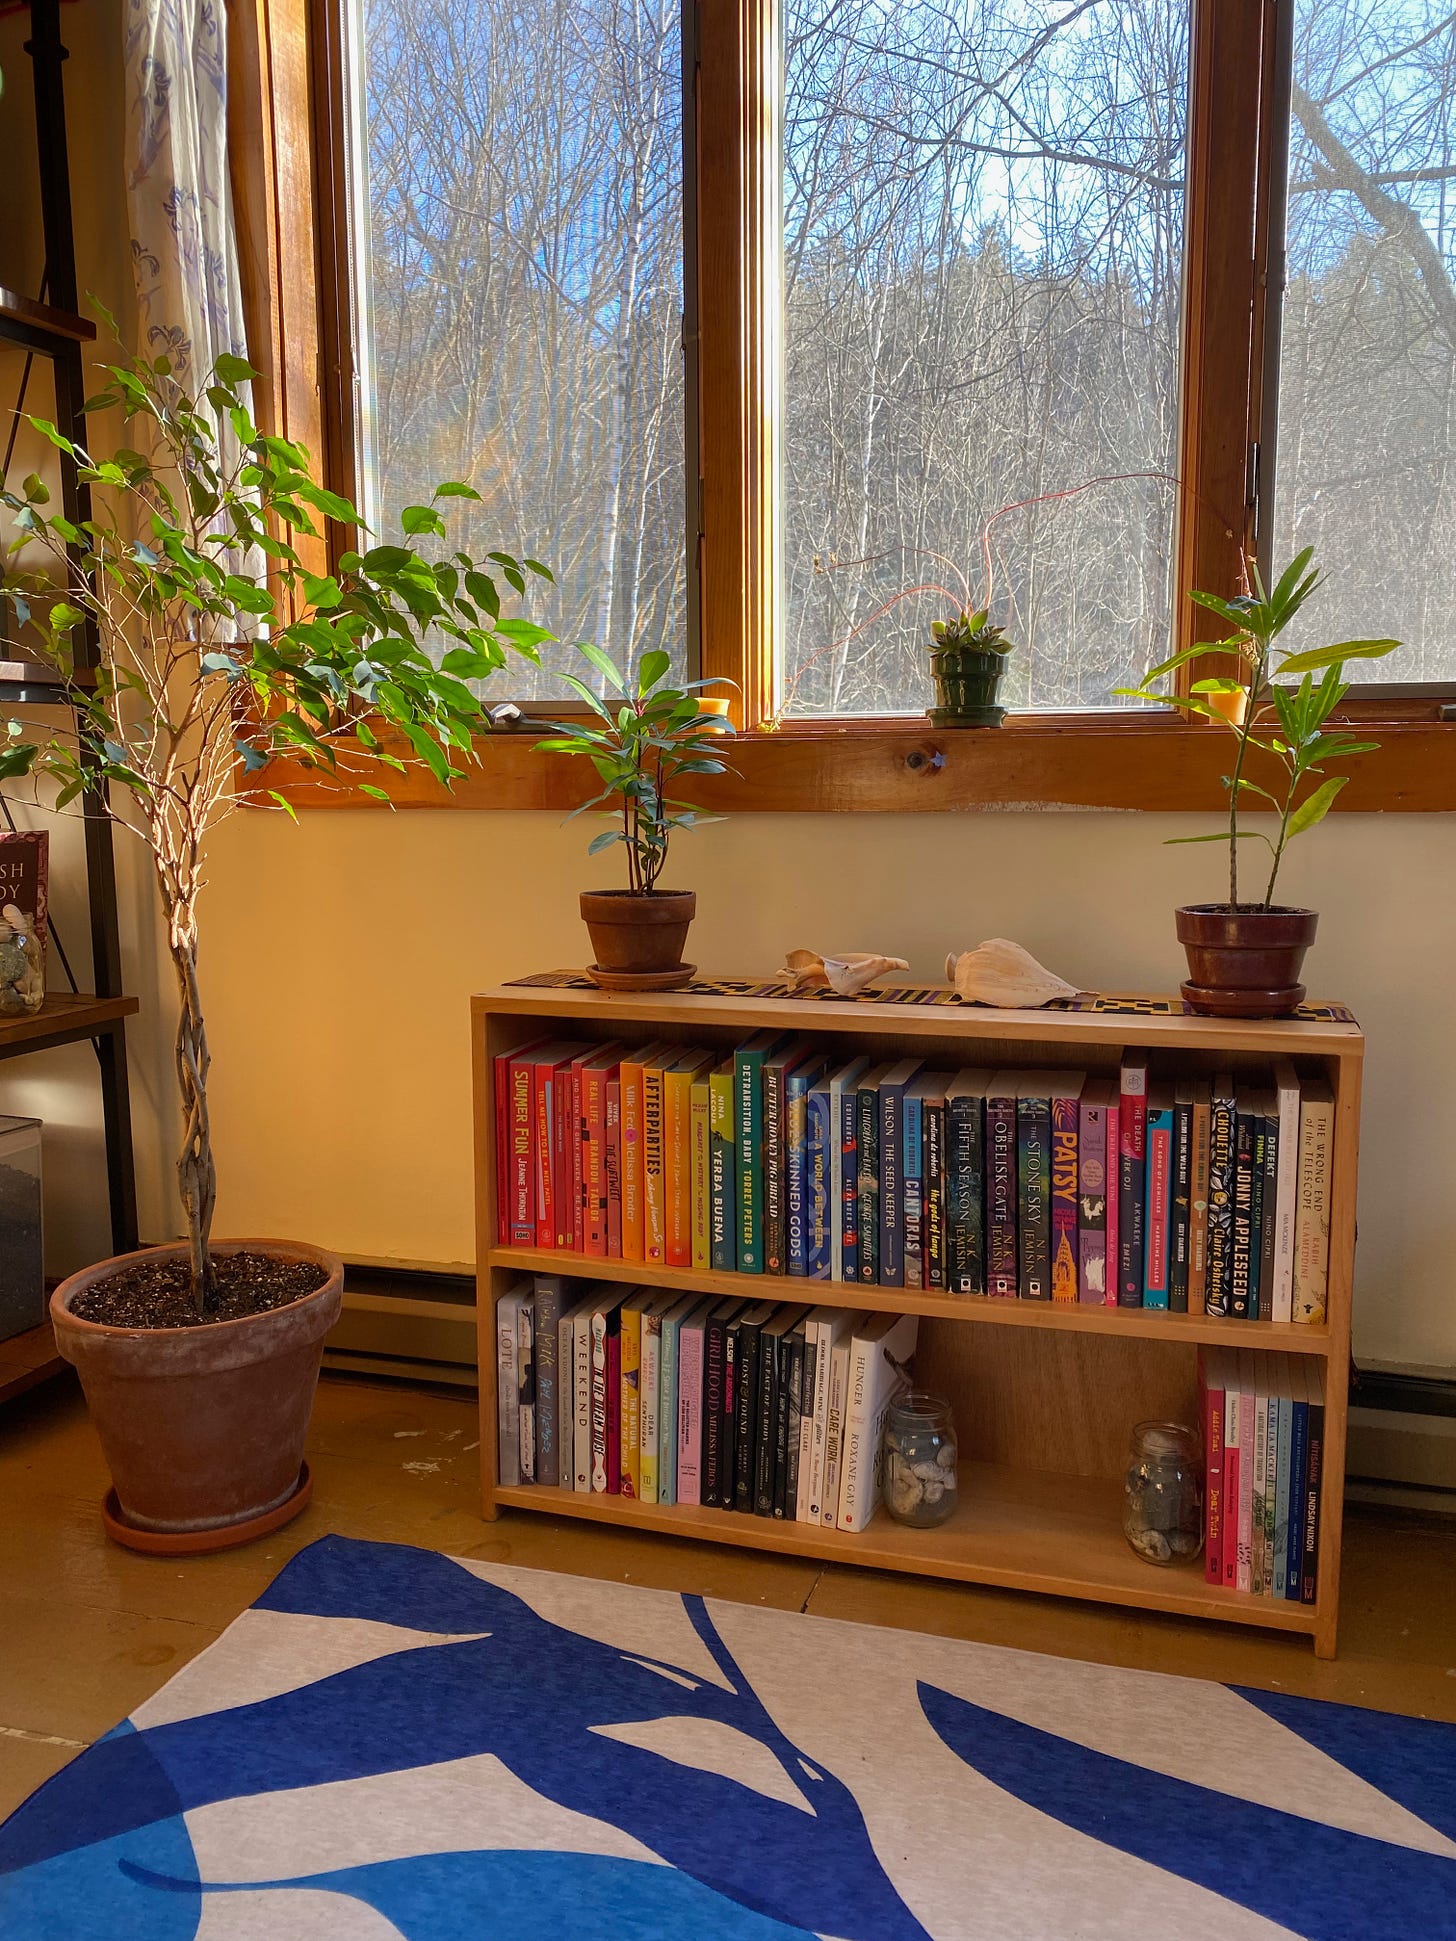 View of a sunny office. Under a window showing blue sky and trees, there’s a low rainbow bookcase topped with small plants. Next to the bookcase is a large ficus tree and a blue and white rug. Everything is bathed in golden light.